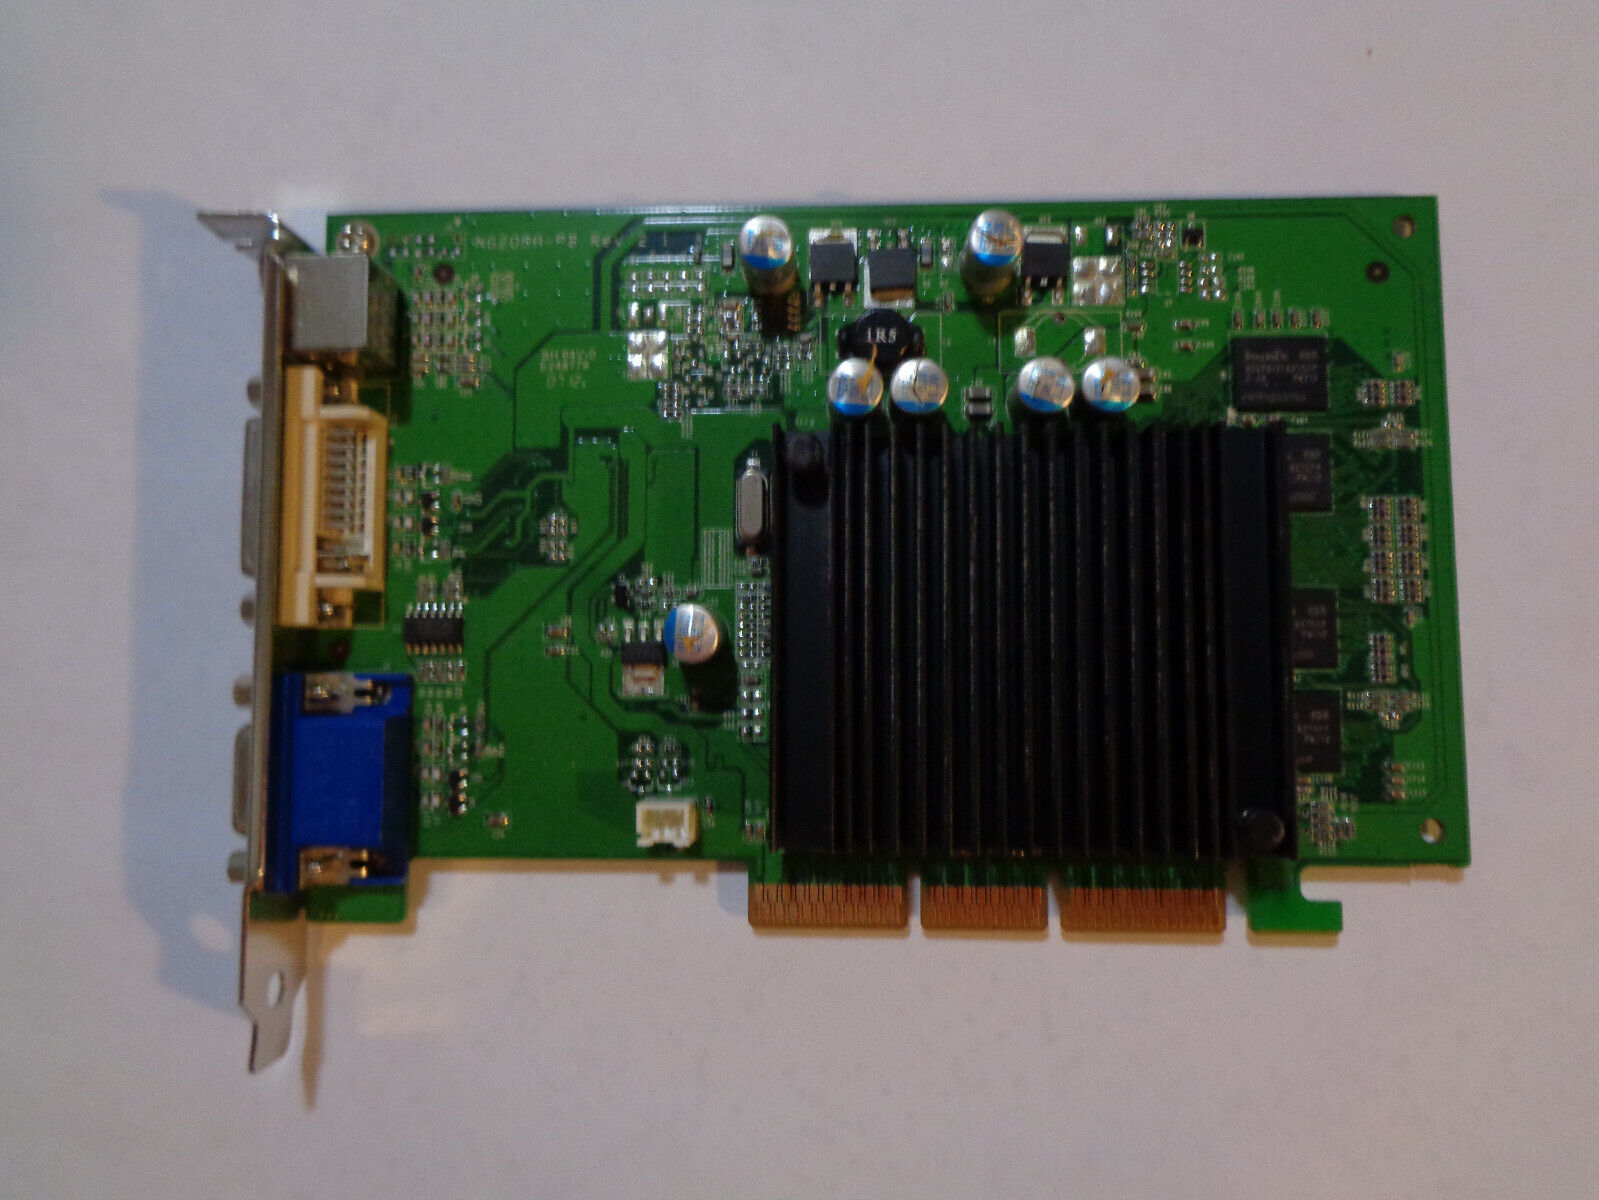 EVGA e-GeForce 6200 AGP 256MB DDR, for parts or repair. Probably not working.